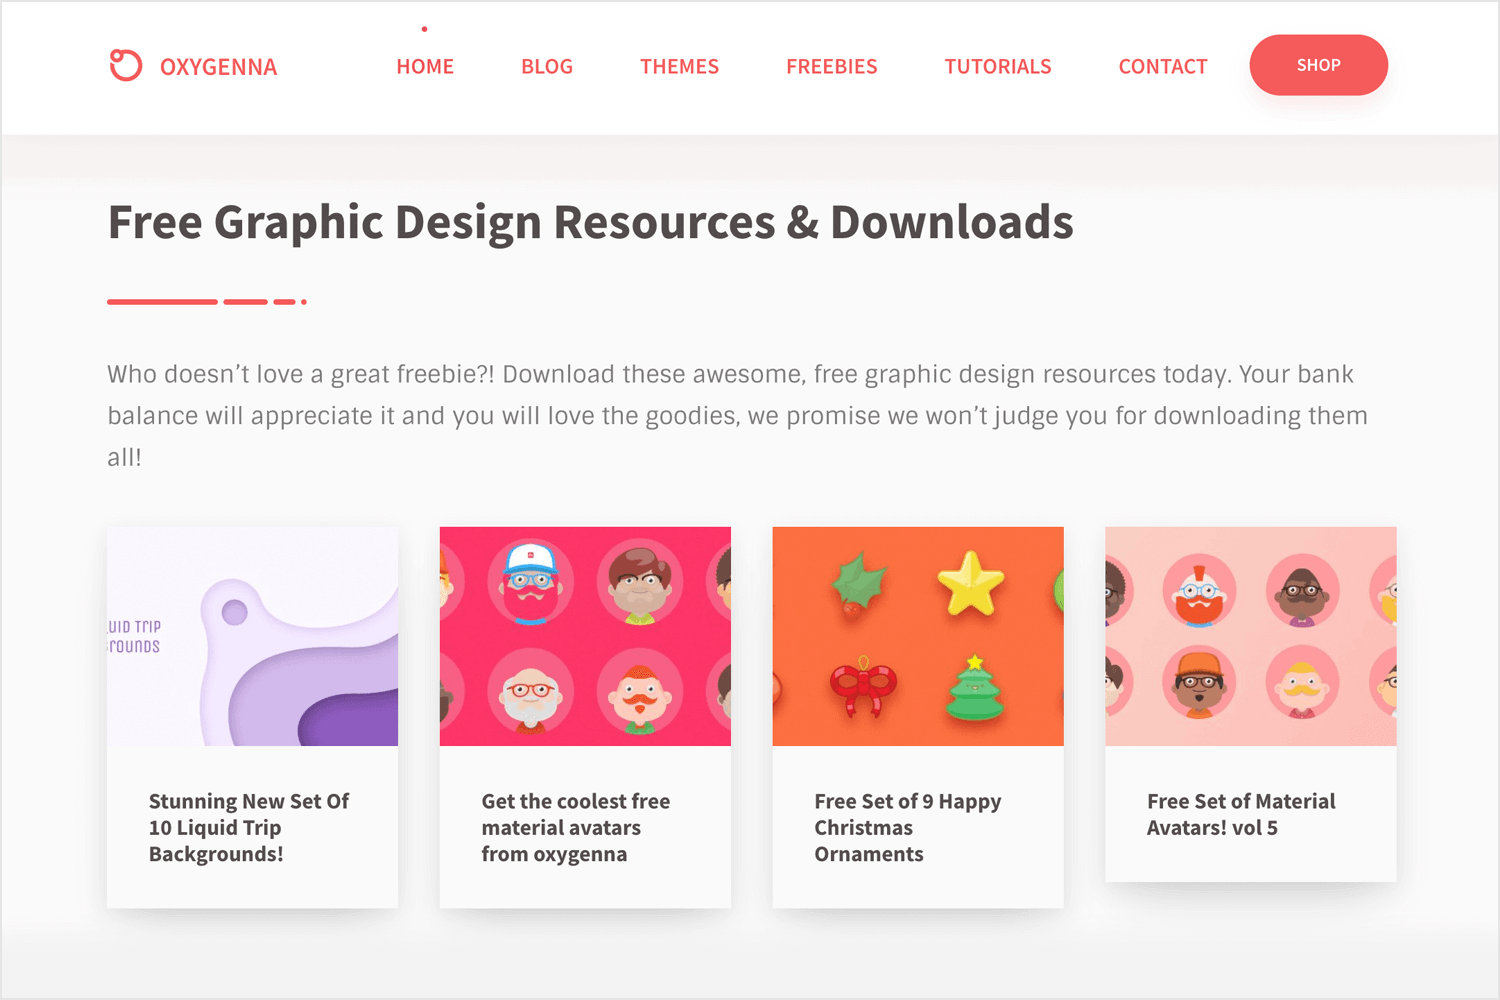 oxygenna for free design resources